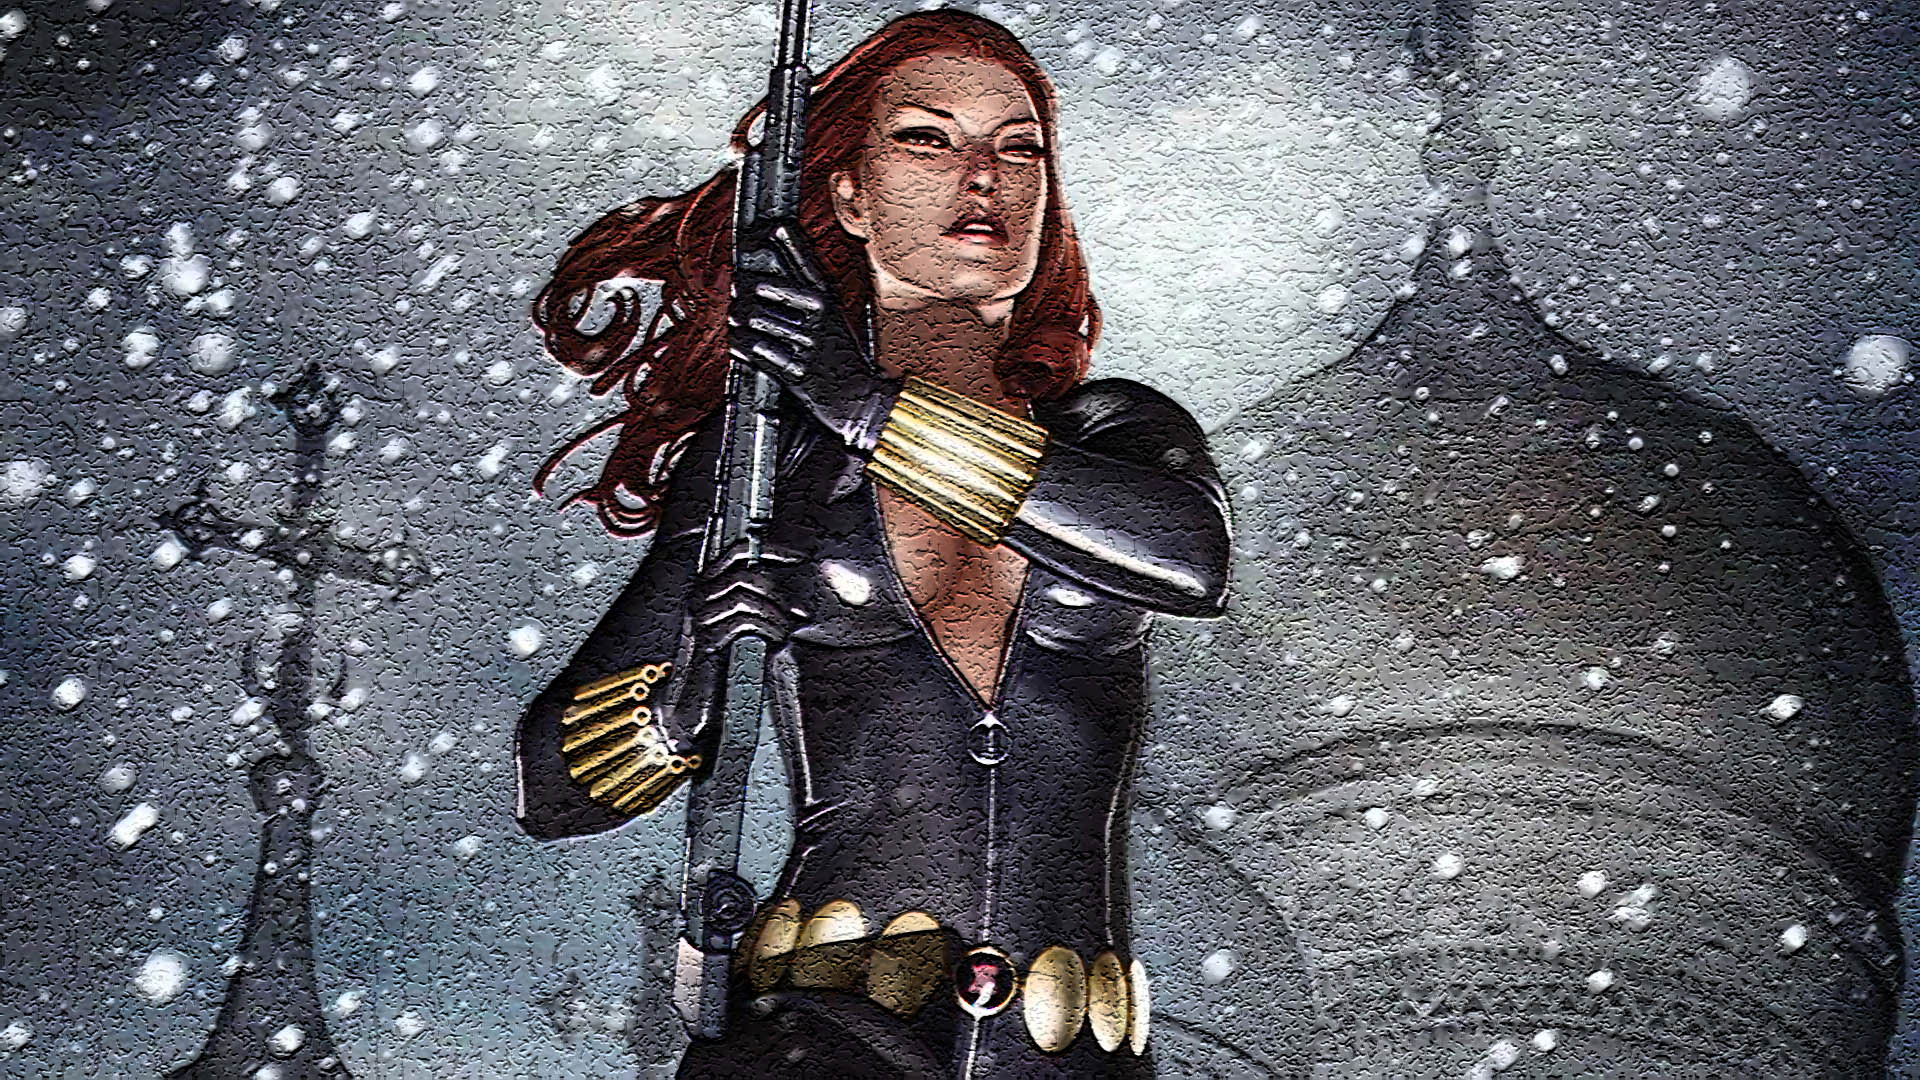  Black  Widow  Wallpapers  Pictures Images